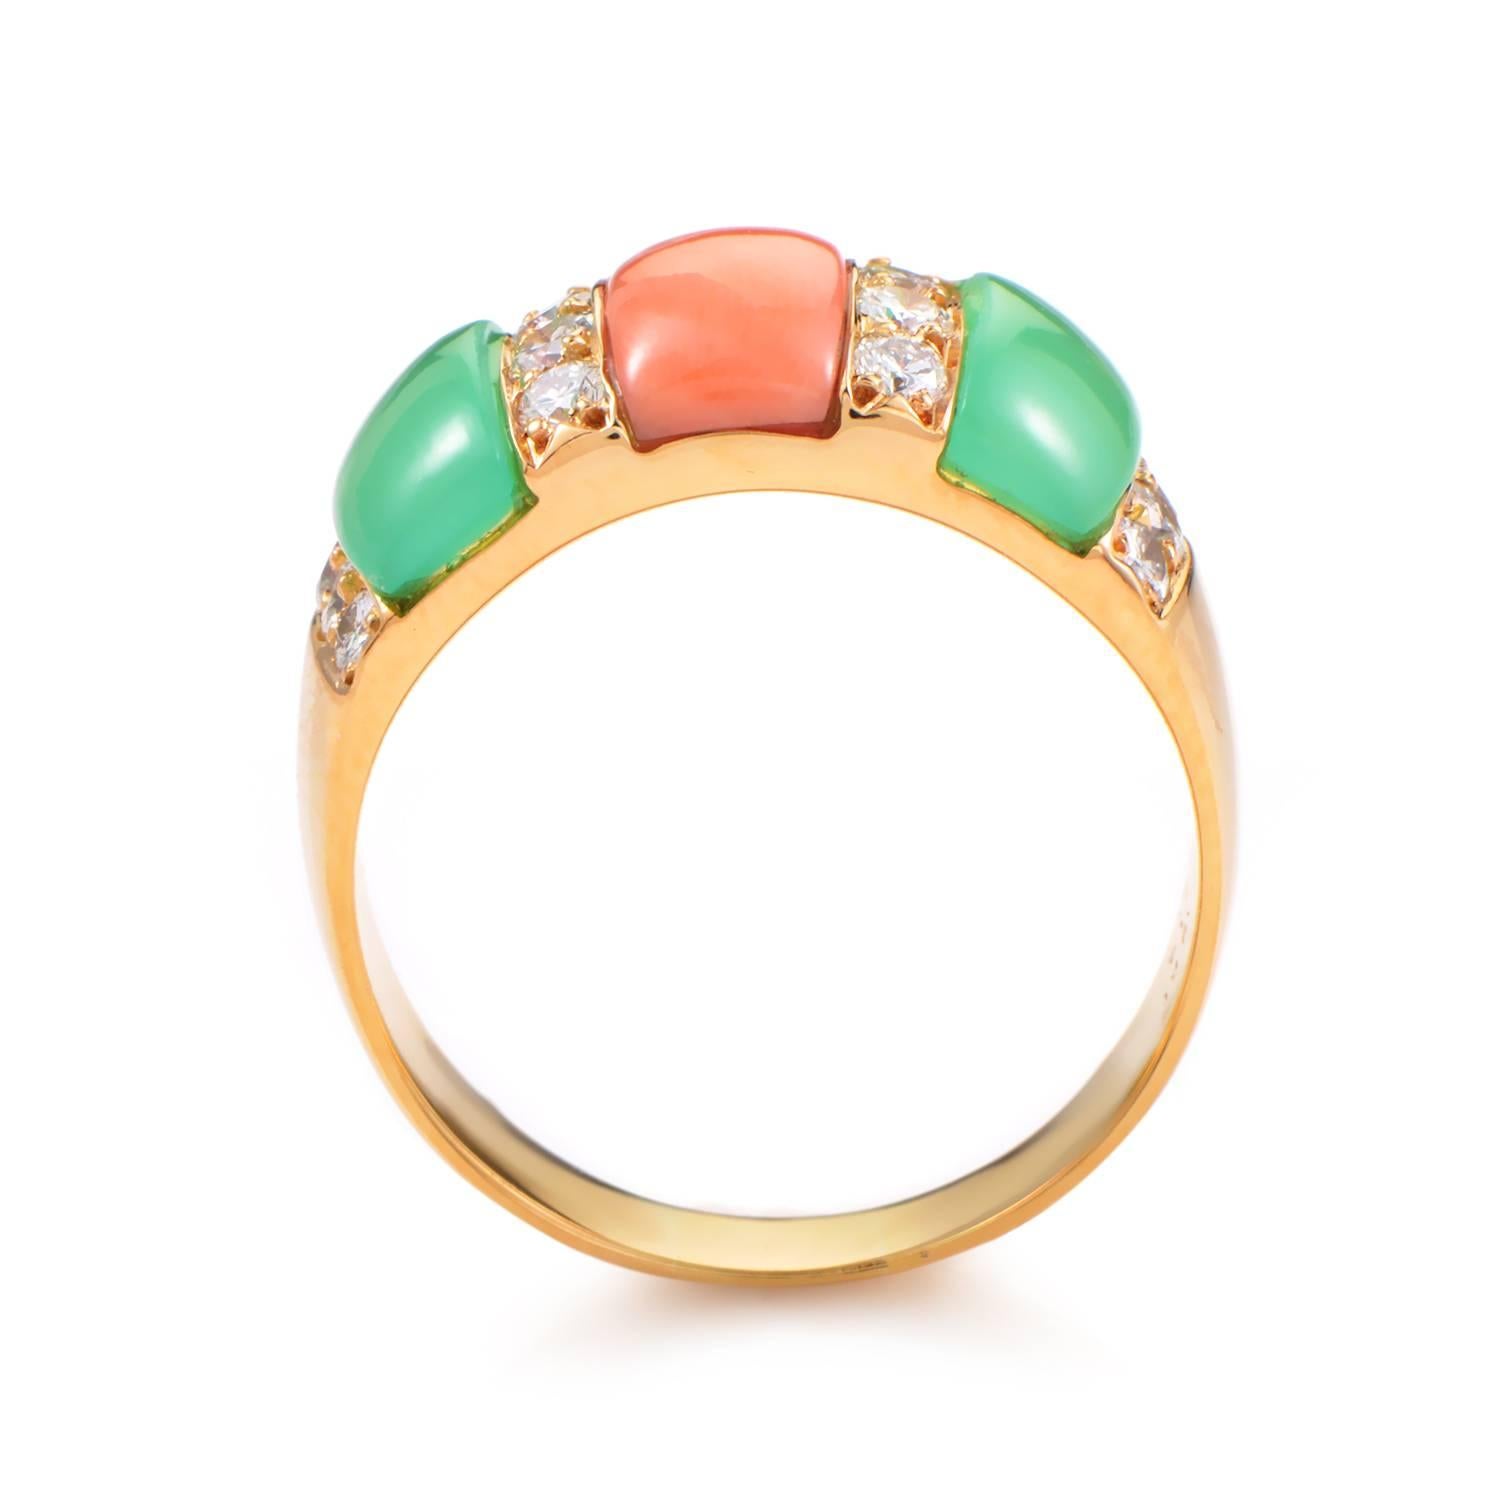 Pretty pastel colors surrounding a band of gold make this ring a truly decadent design. The ring is forged from 18K yellow gold and is accented with chrysoprase and coral. Lastly, .64ct of diamonds give the ring an additional hint of luxury.
Ring